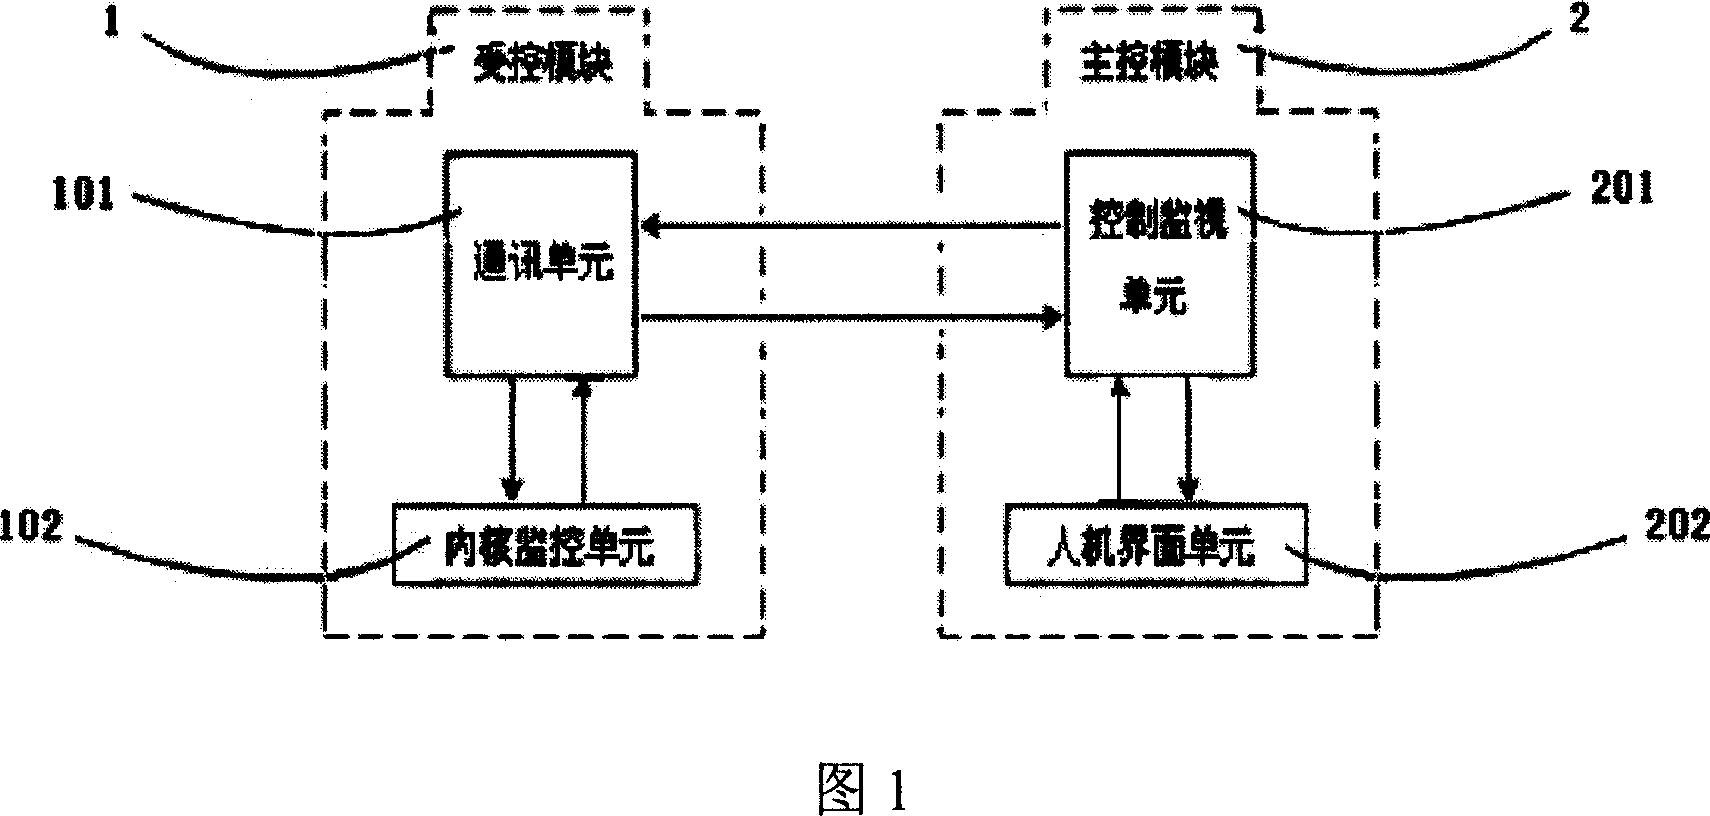 Movable memory apparatus monitoring method and apparatus for